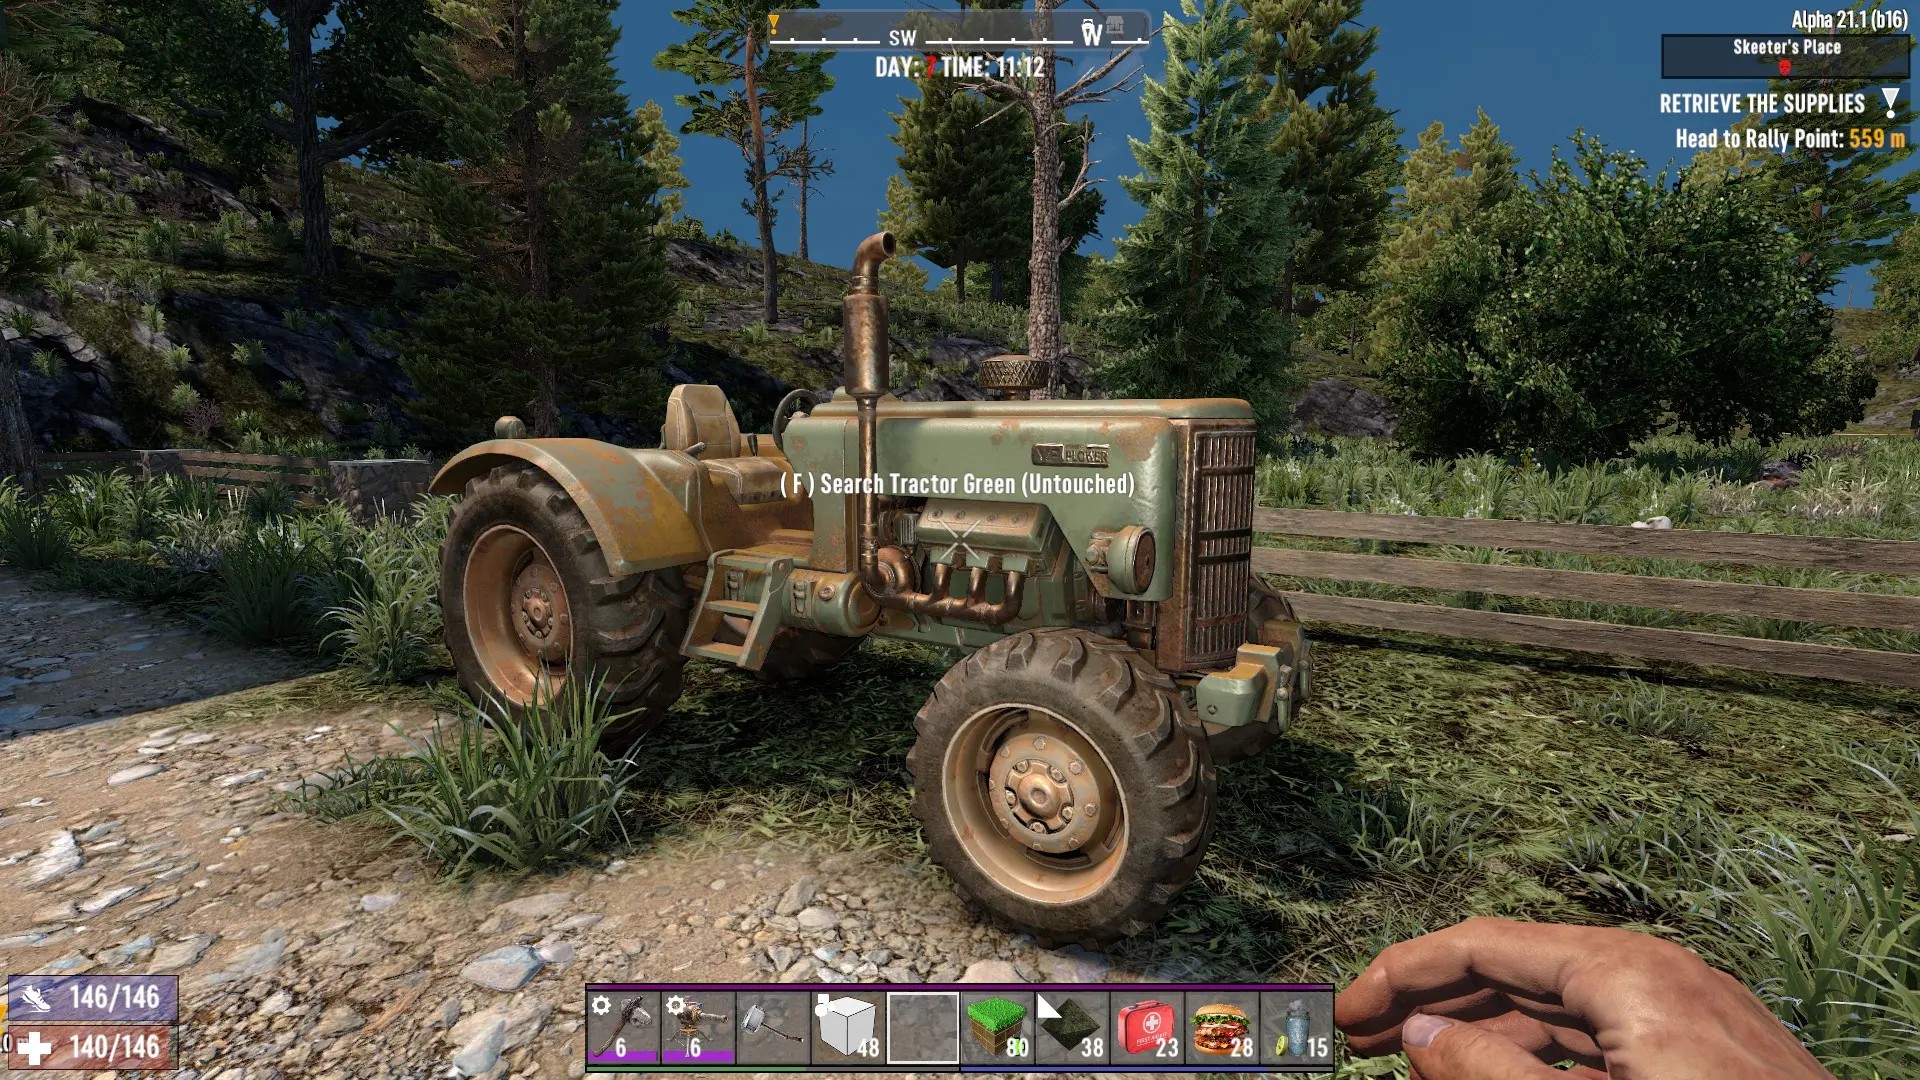 A tractor in 7 Days to Die showing the option to loot it, thanks to the FPS Lootables, one of the best 7 Days to Die mods.